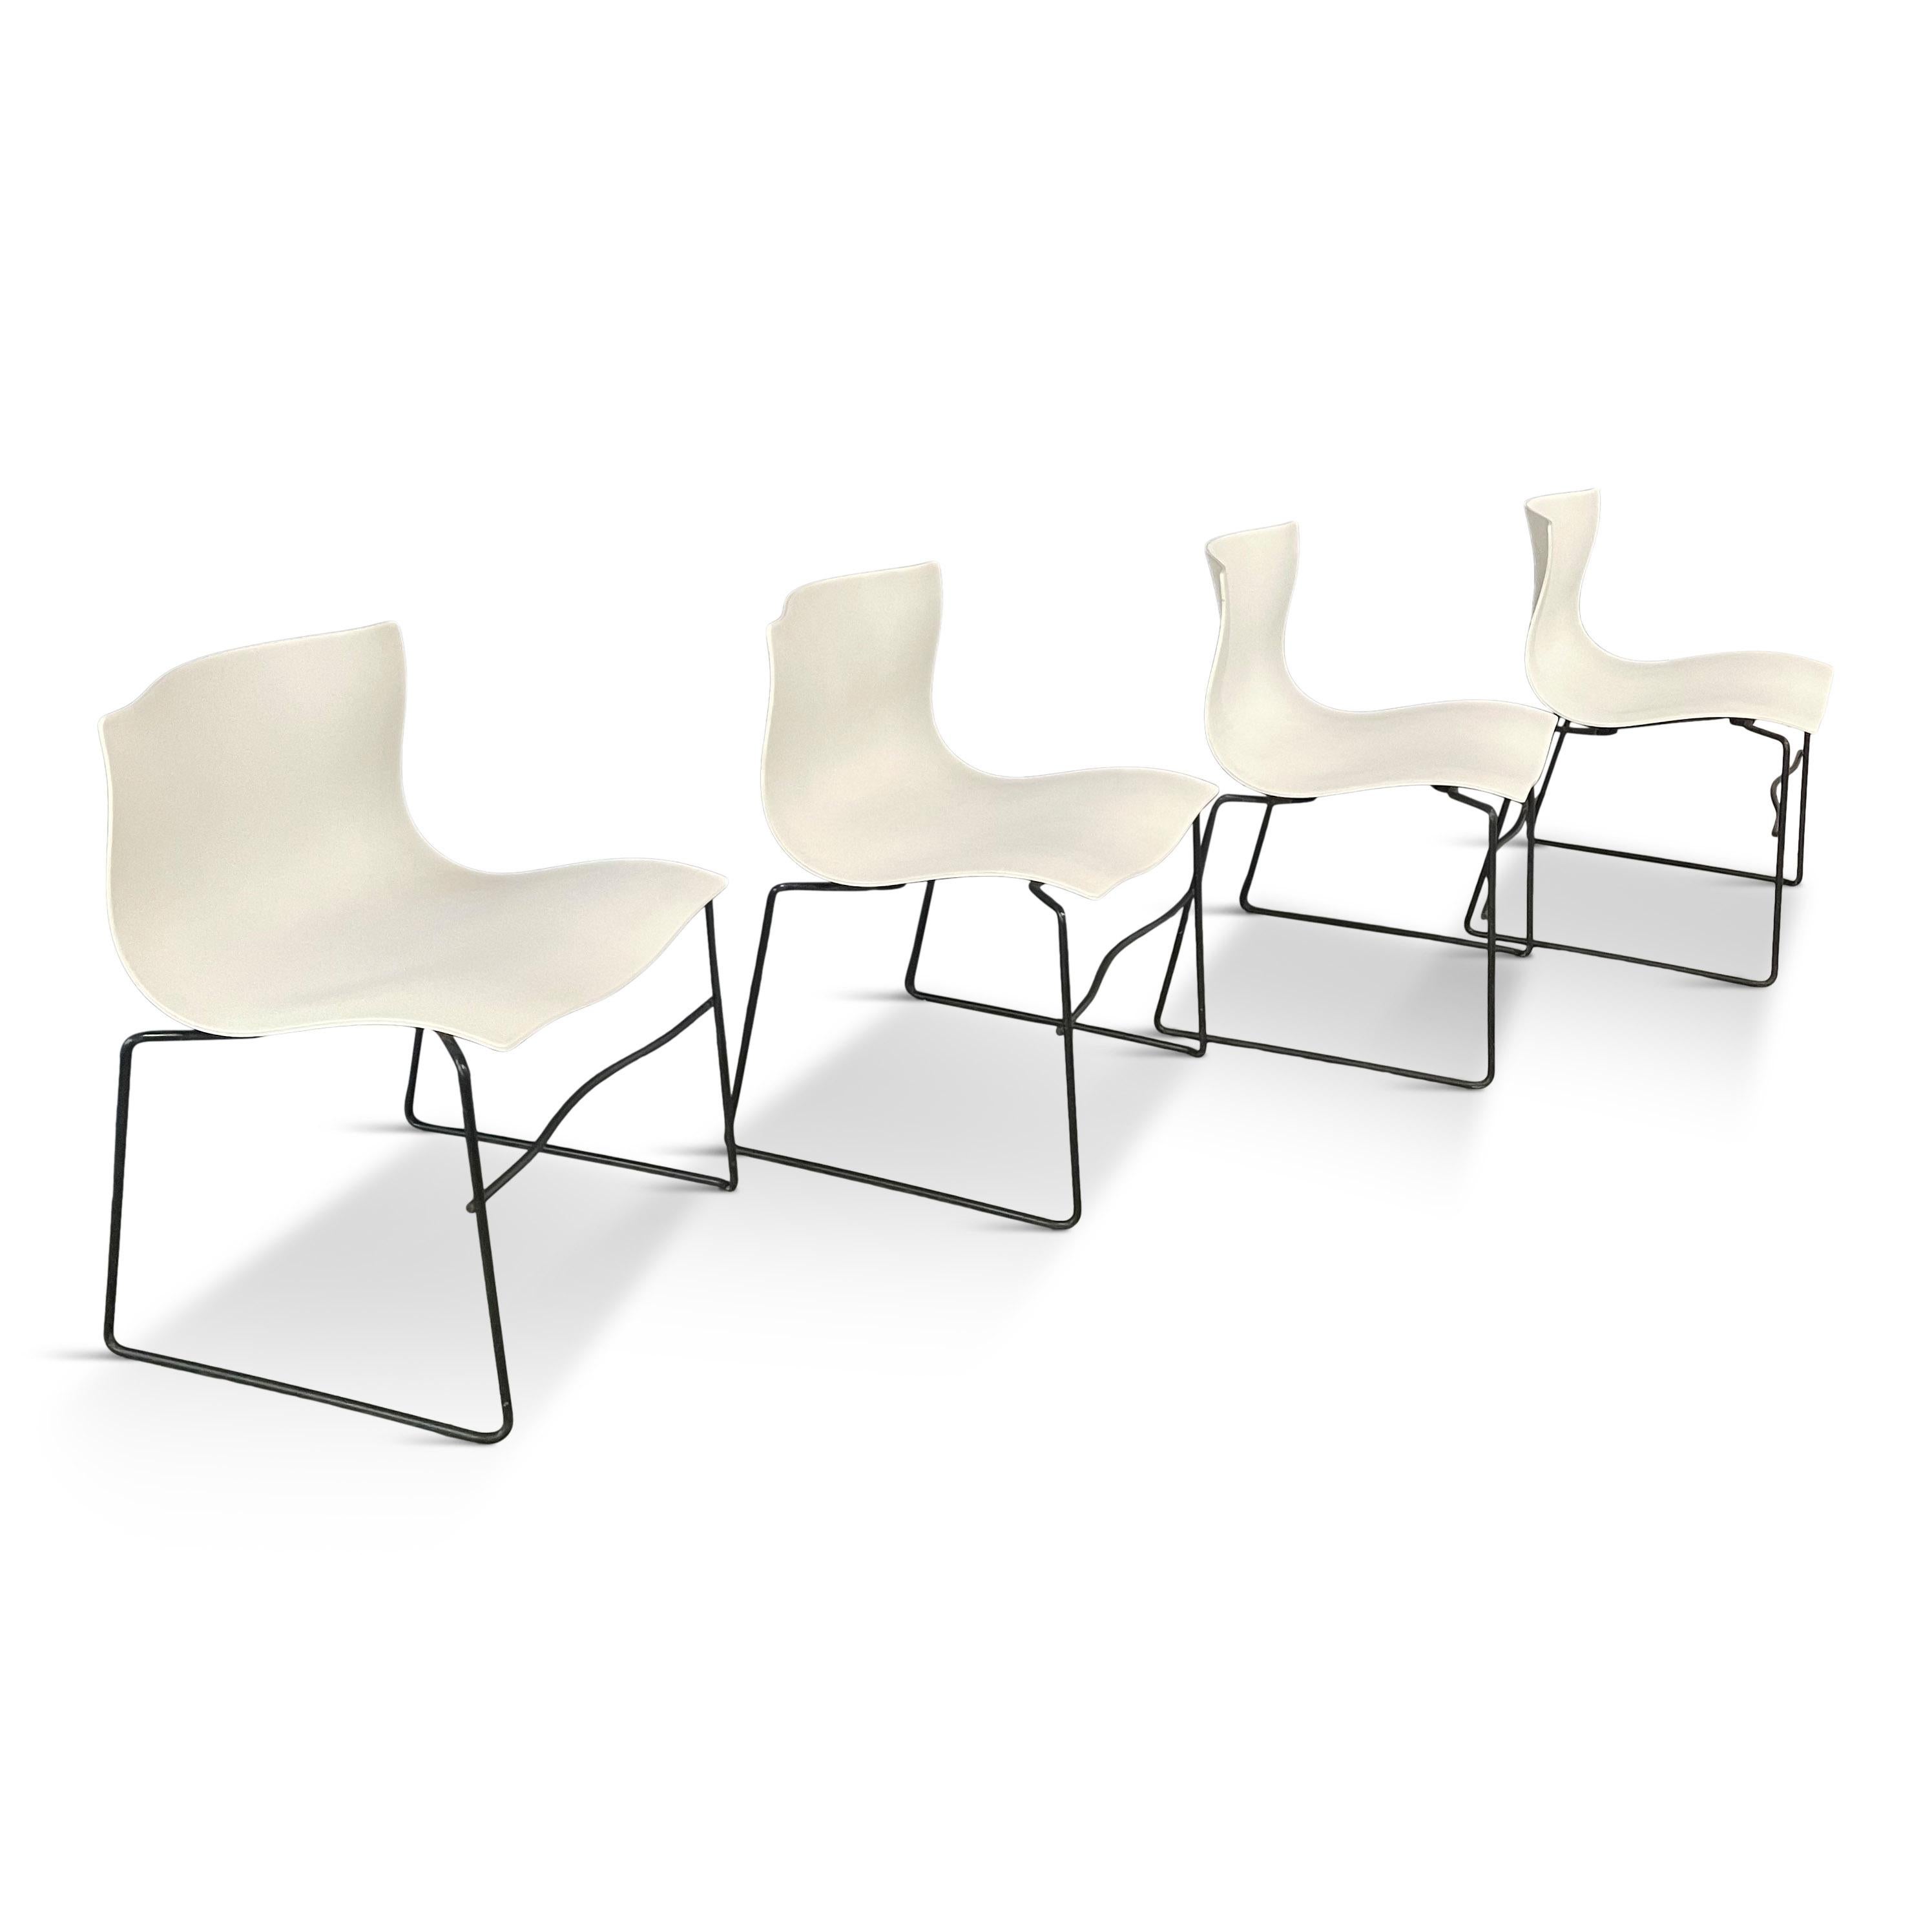 Handkerchief Chairs in White by Massimo Vignelli for Knoll Post Modern In Good Condition For Sale In Philadelphia, PA